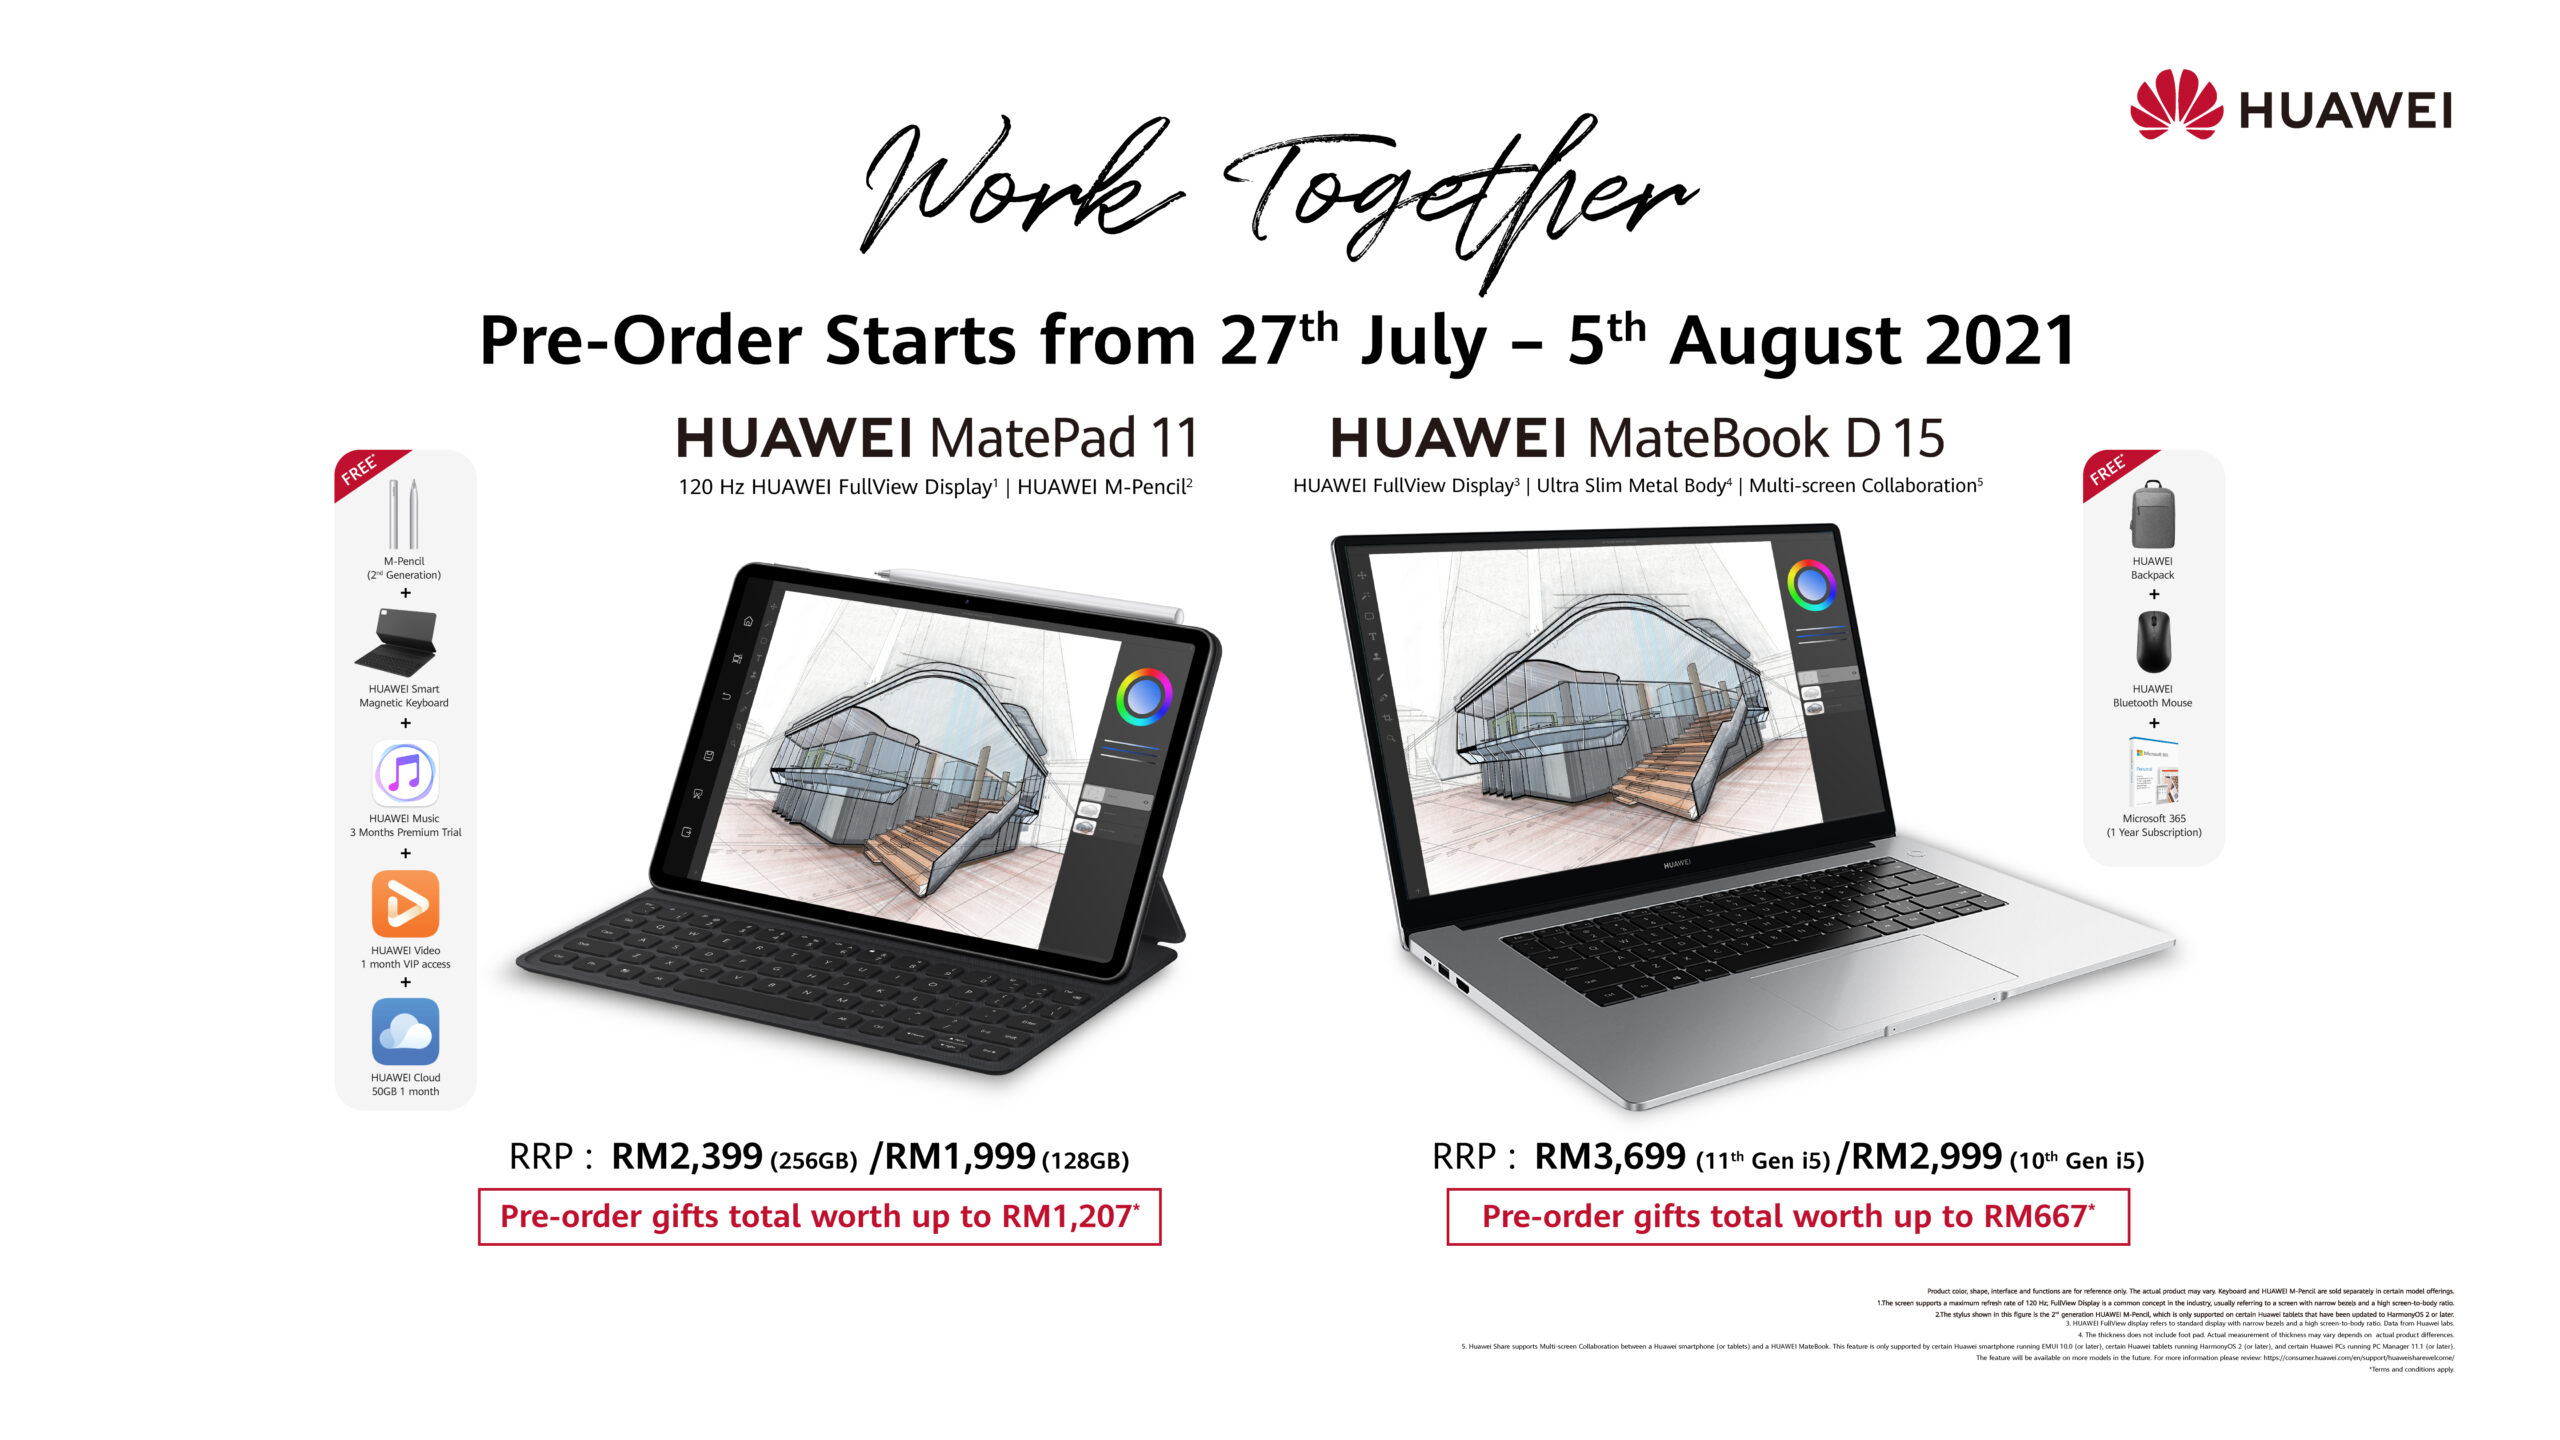 HUAWEI MatePad 11 and HUAWEI MateBook Variants available for Pre-orders Now: Enjoy Freebies worth up to RM1,207 9